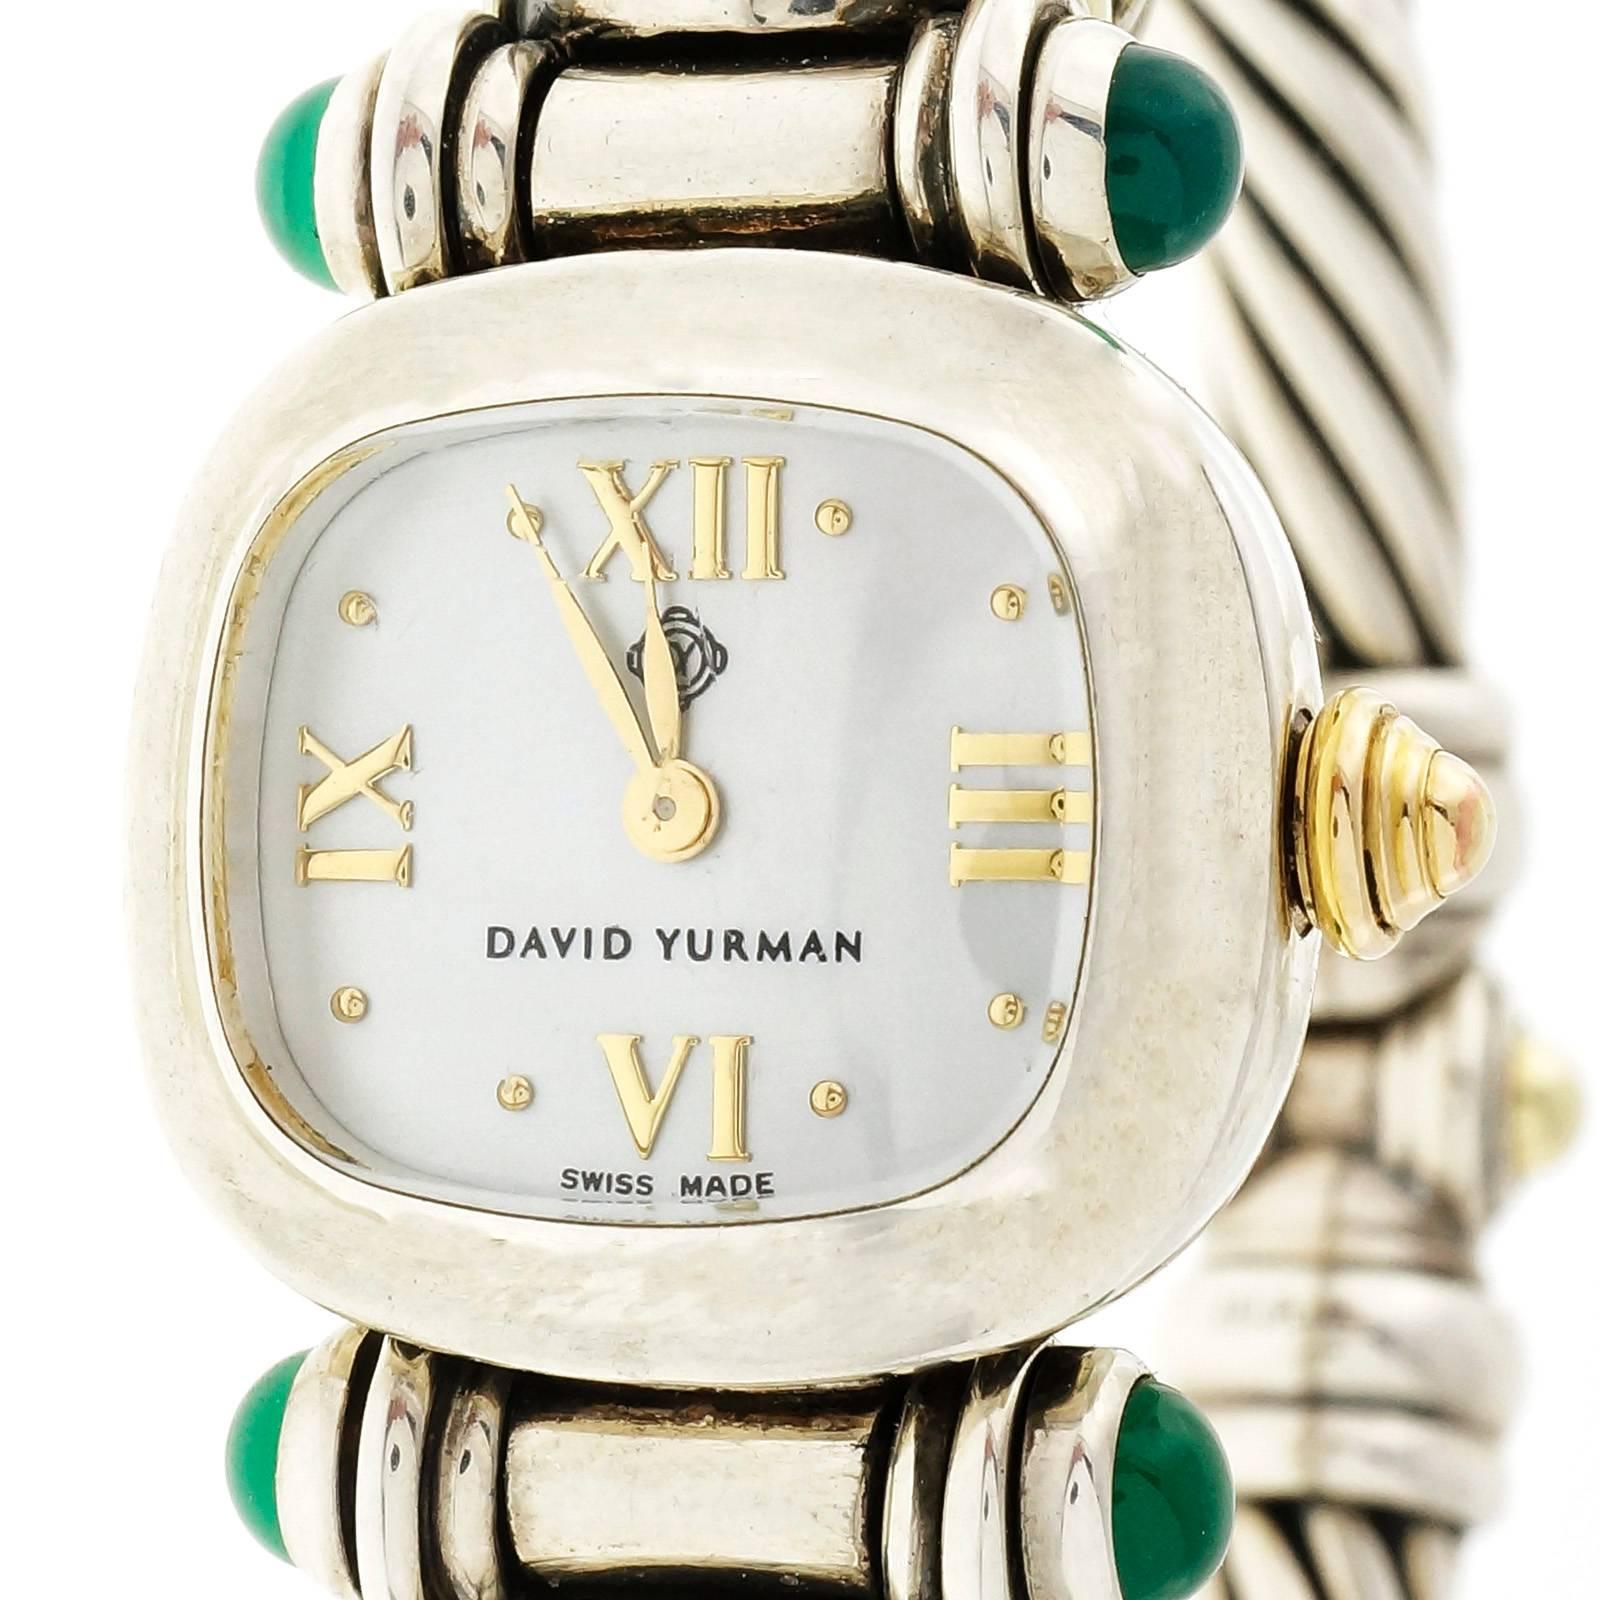 David Yurman  Amethyst green Tourmaline silver and 14k yellow gold cable wristwatch with fully serviced Quartz movement. Mother of pearl original dial. Fits a 7 inch wrist. 

2 square Amethyst 4.45 x 5mm
4 round cabochon green Tourmaline 3.6mm
1